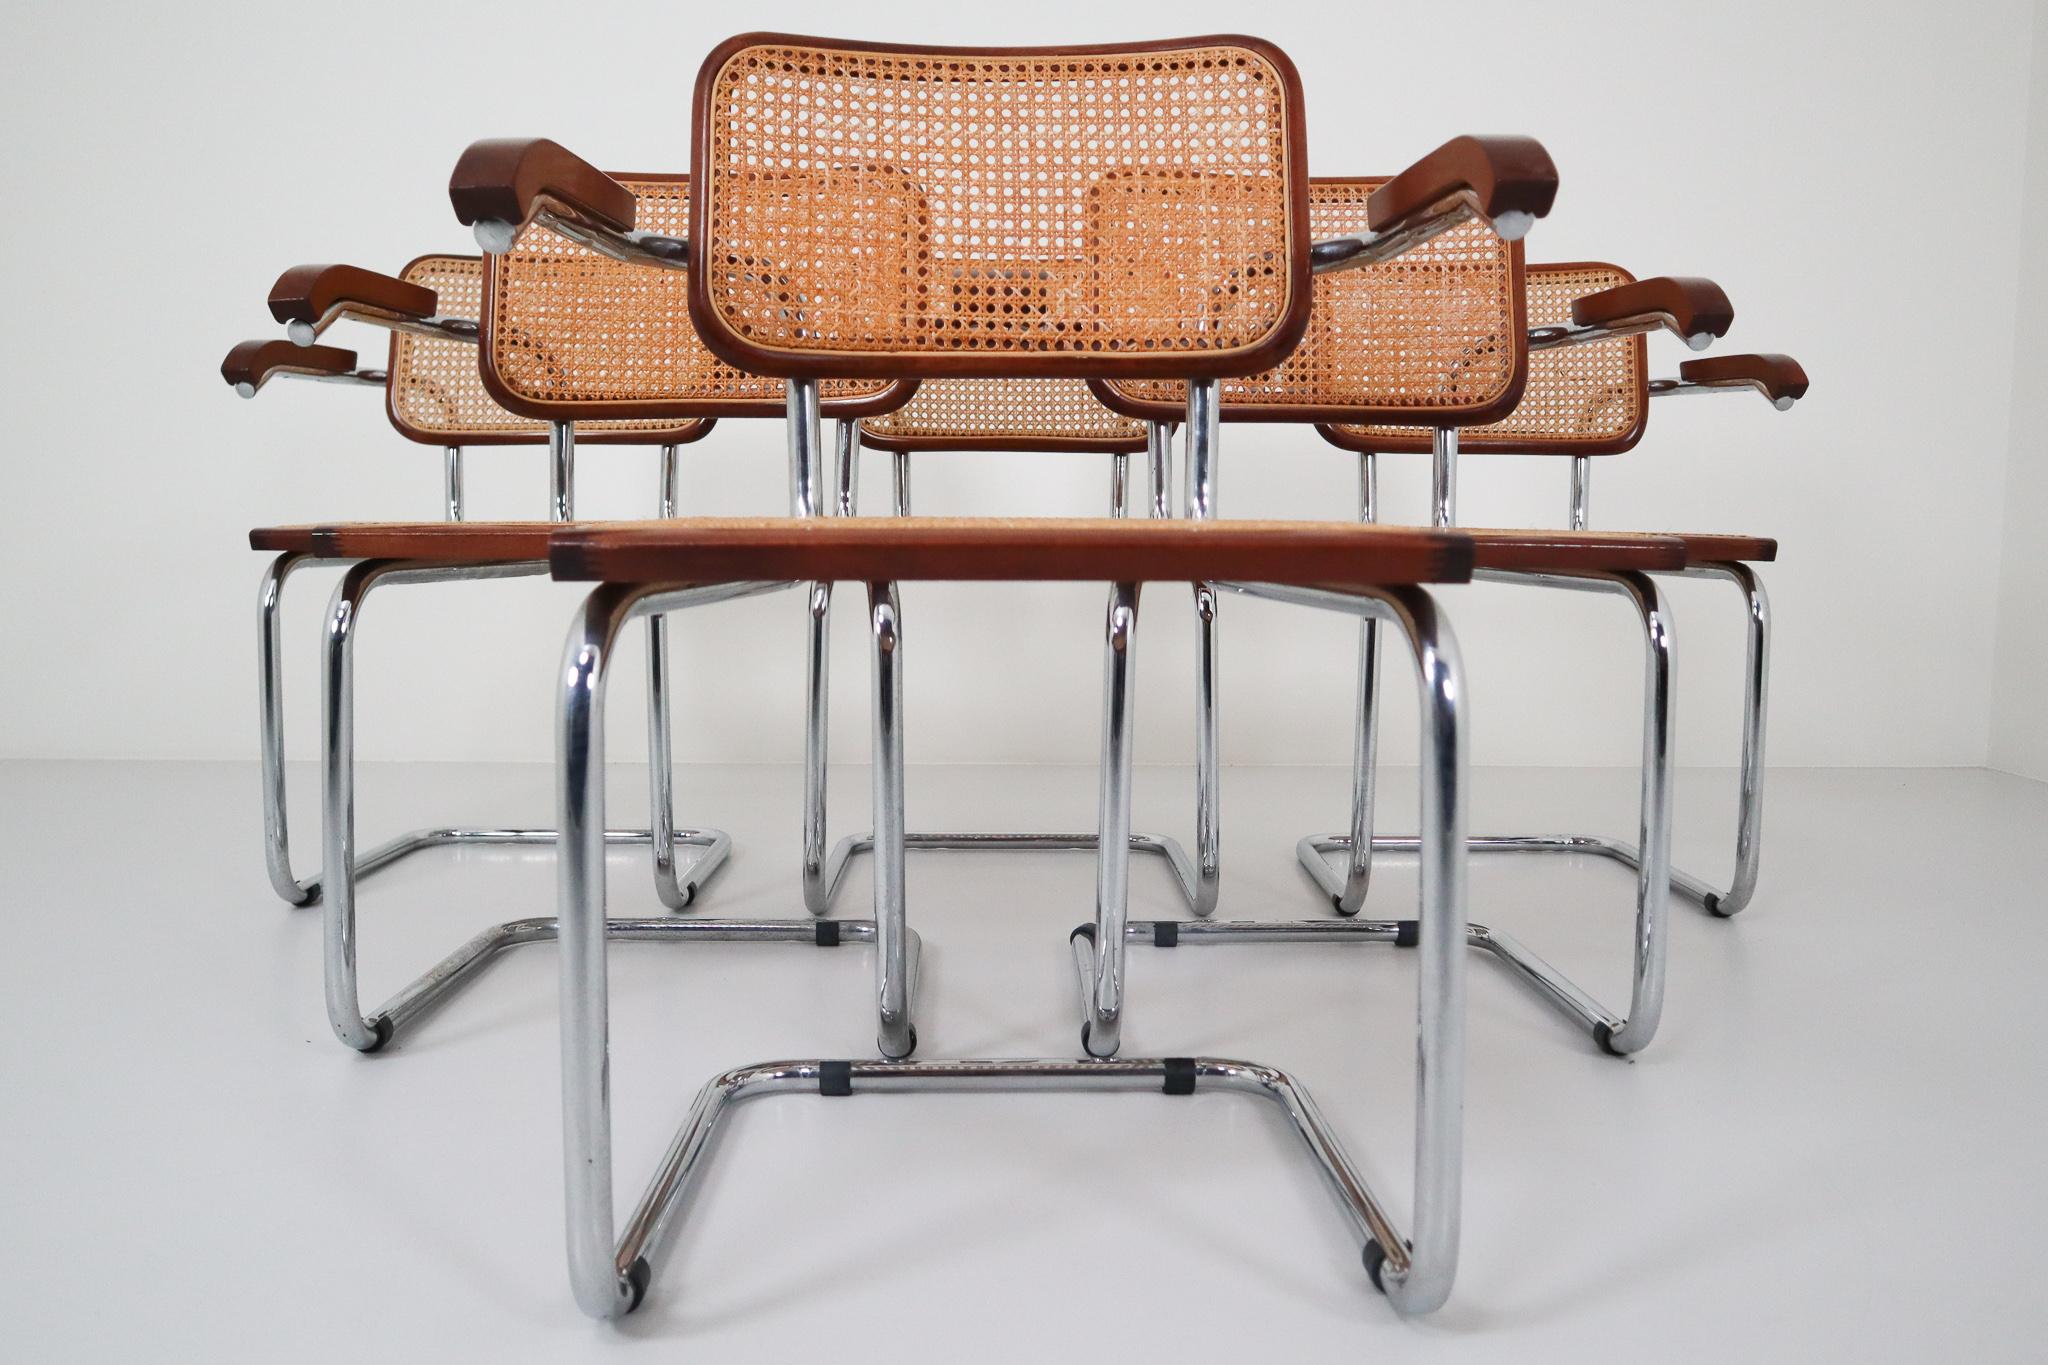 Beautiful set of six “Cesca” armchairs manufactured in Italy, 1970. Cane seat and back with wood finish, chrome steel tubular cantilever frame. Cesca chairs were originally designed in 1928 by French Hungarian architect Marcel Breuer and named after